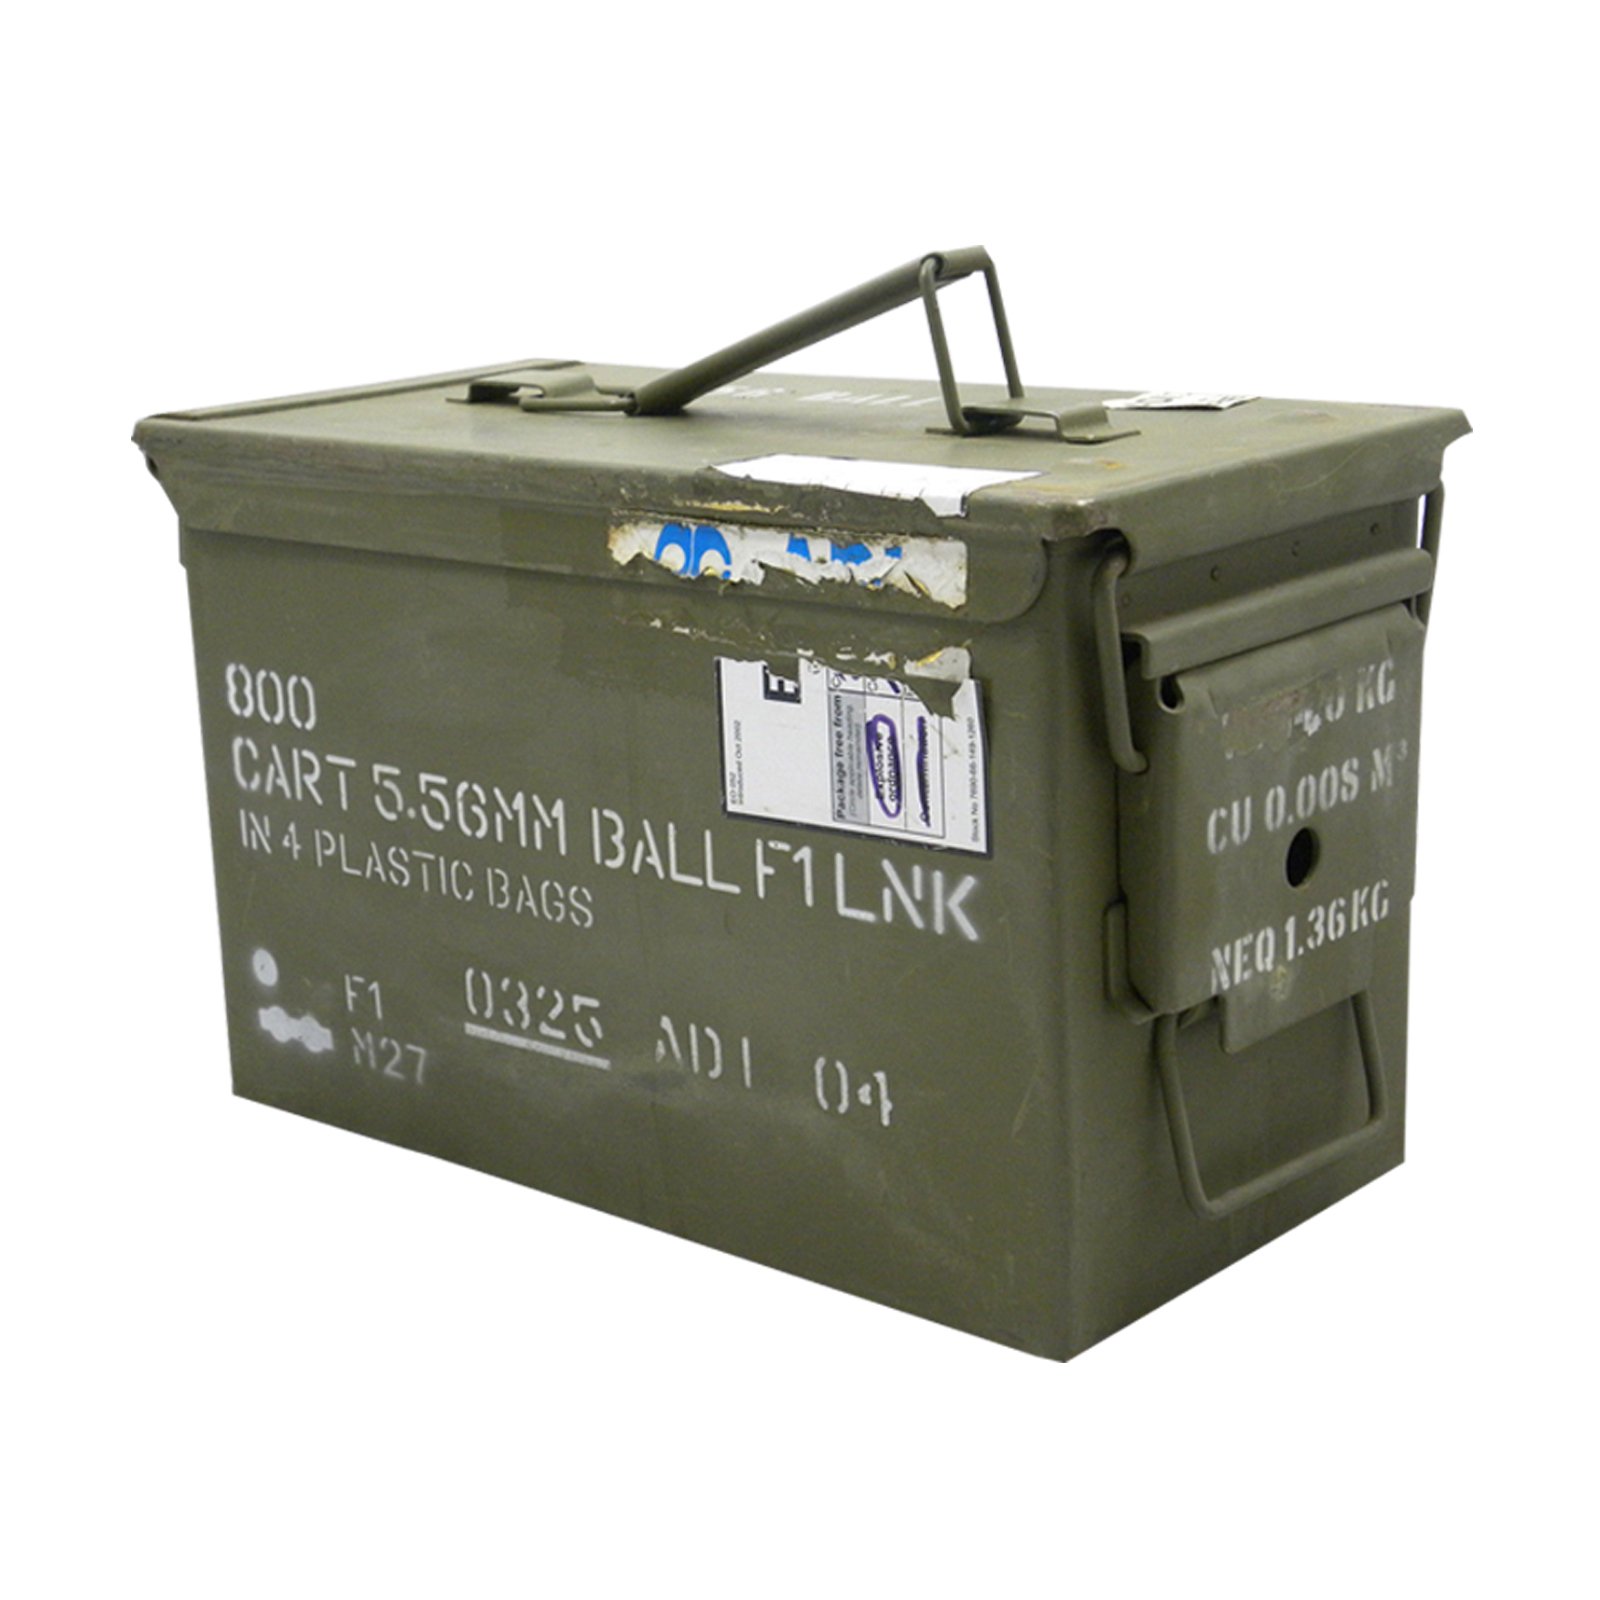 2 M2A1 50cal 5.56 Ammo Cans/Ammo Box in Military Surplus Wood Ammunition Crate